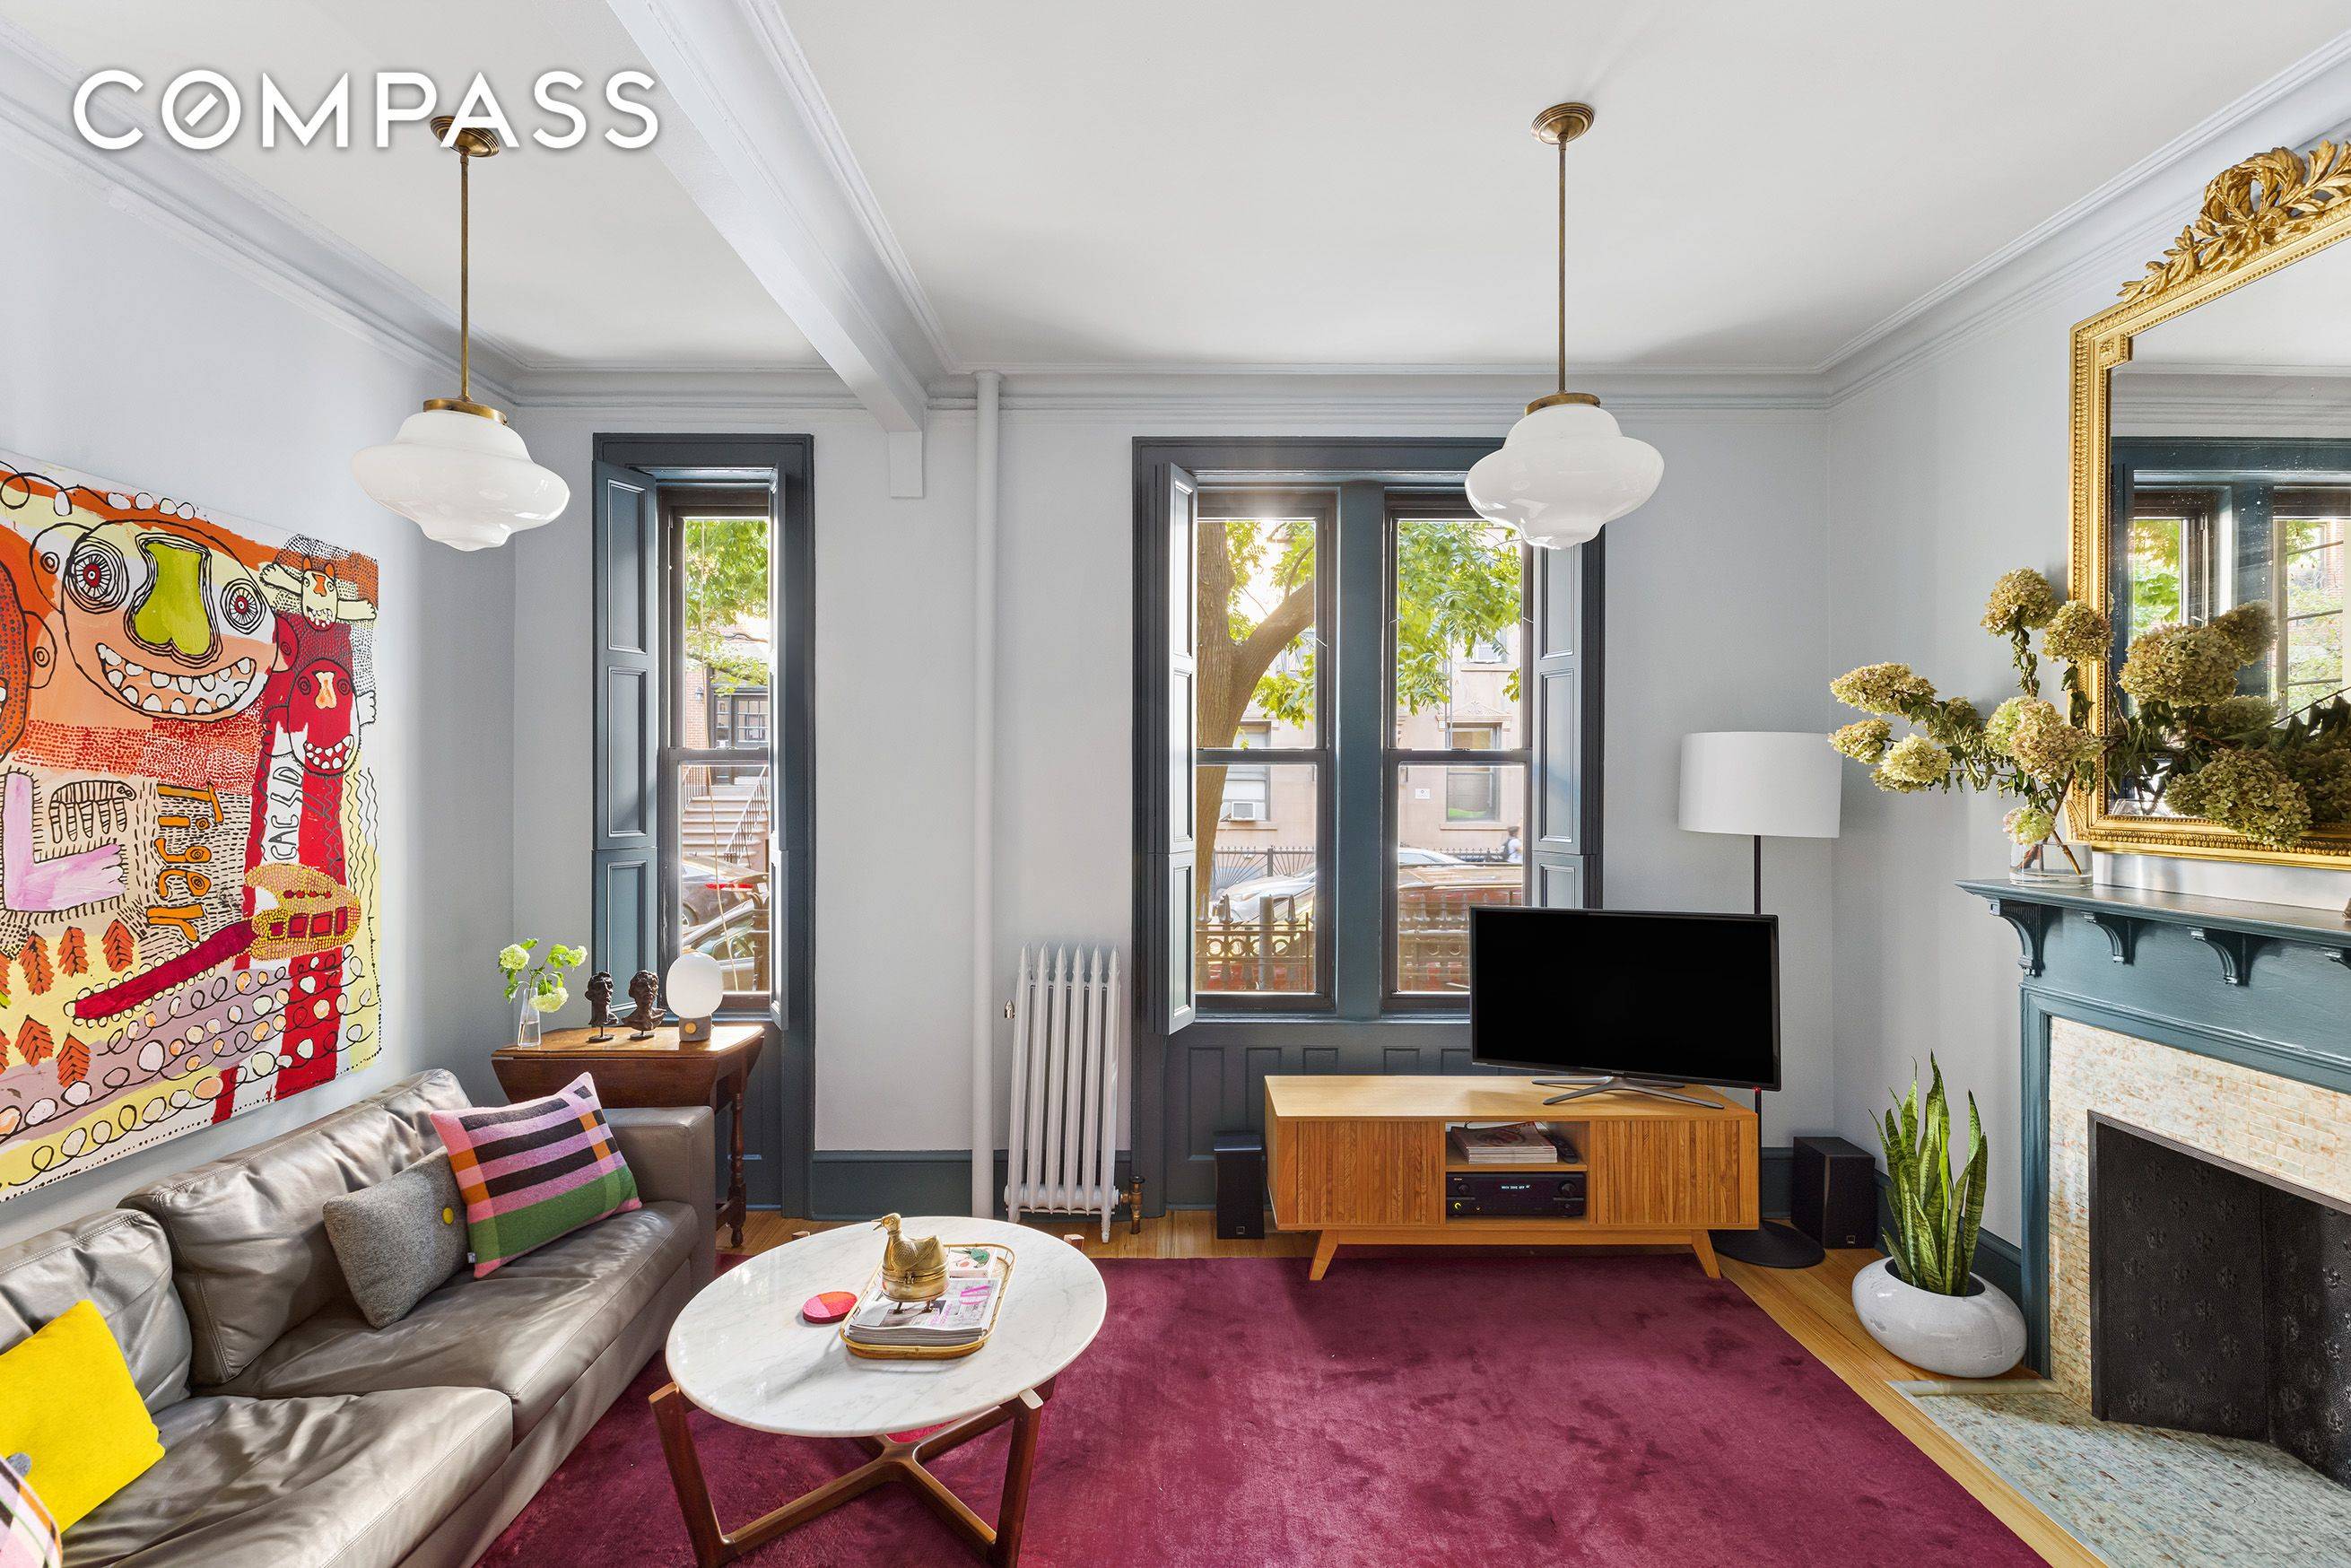 Welcome to Apartment 1FE, located on the tranquil and picturesque West 21st Street, nestled in the heart of Chelsea.